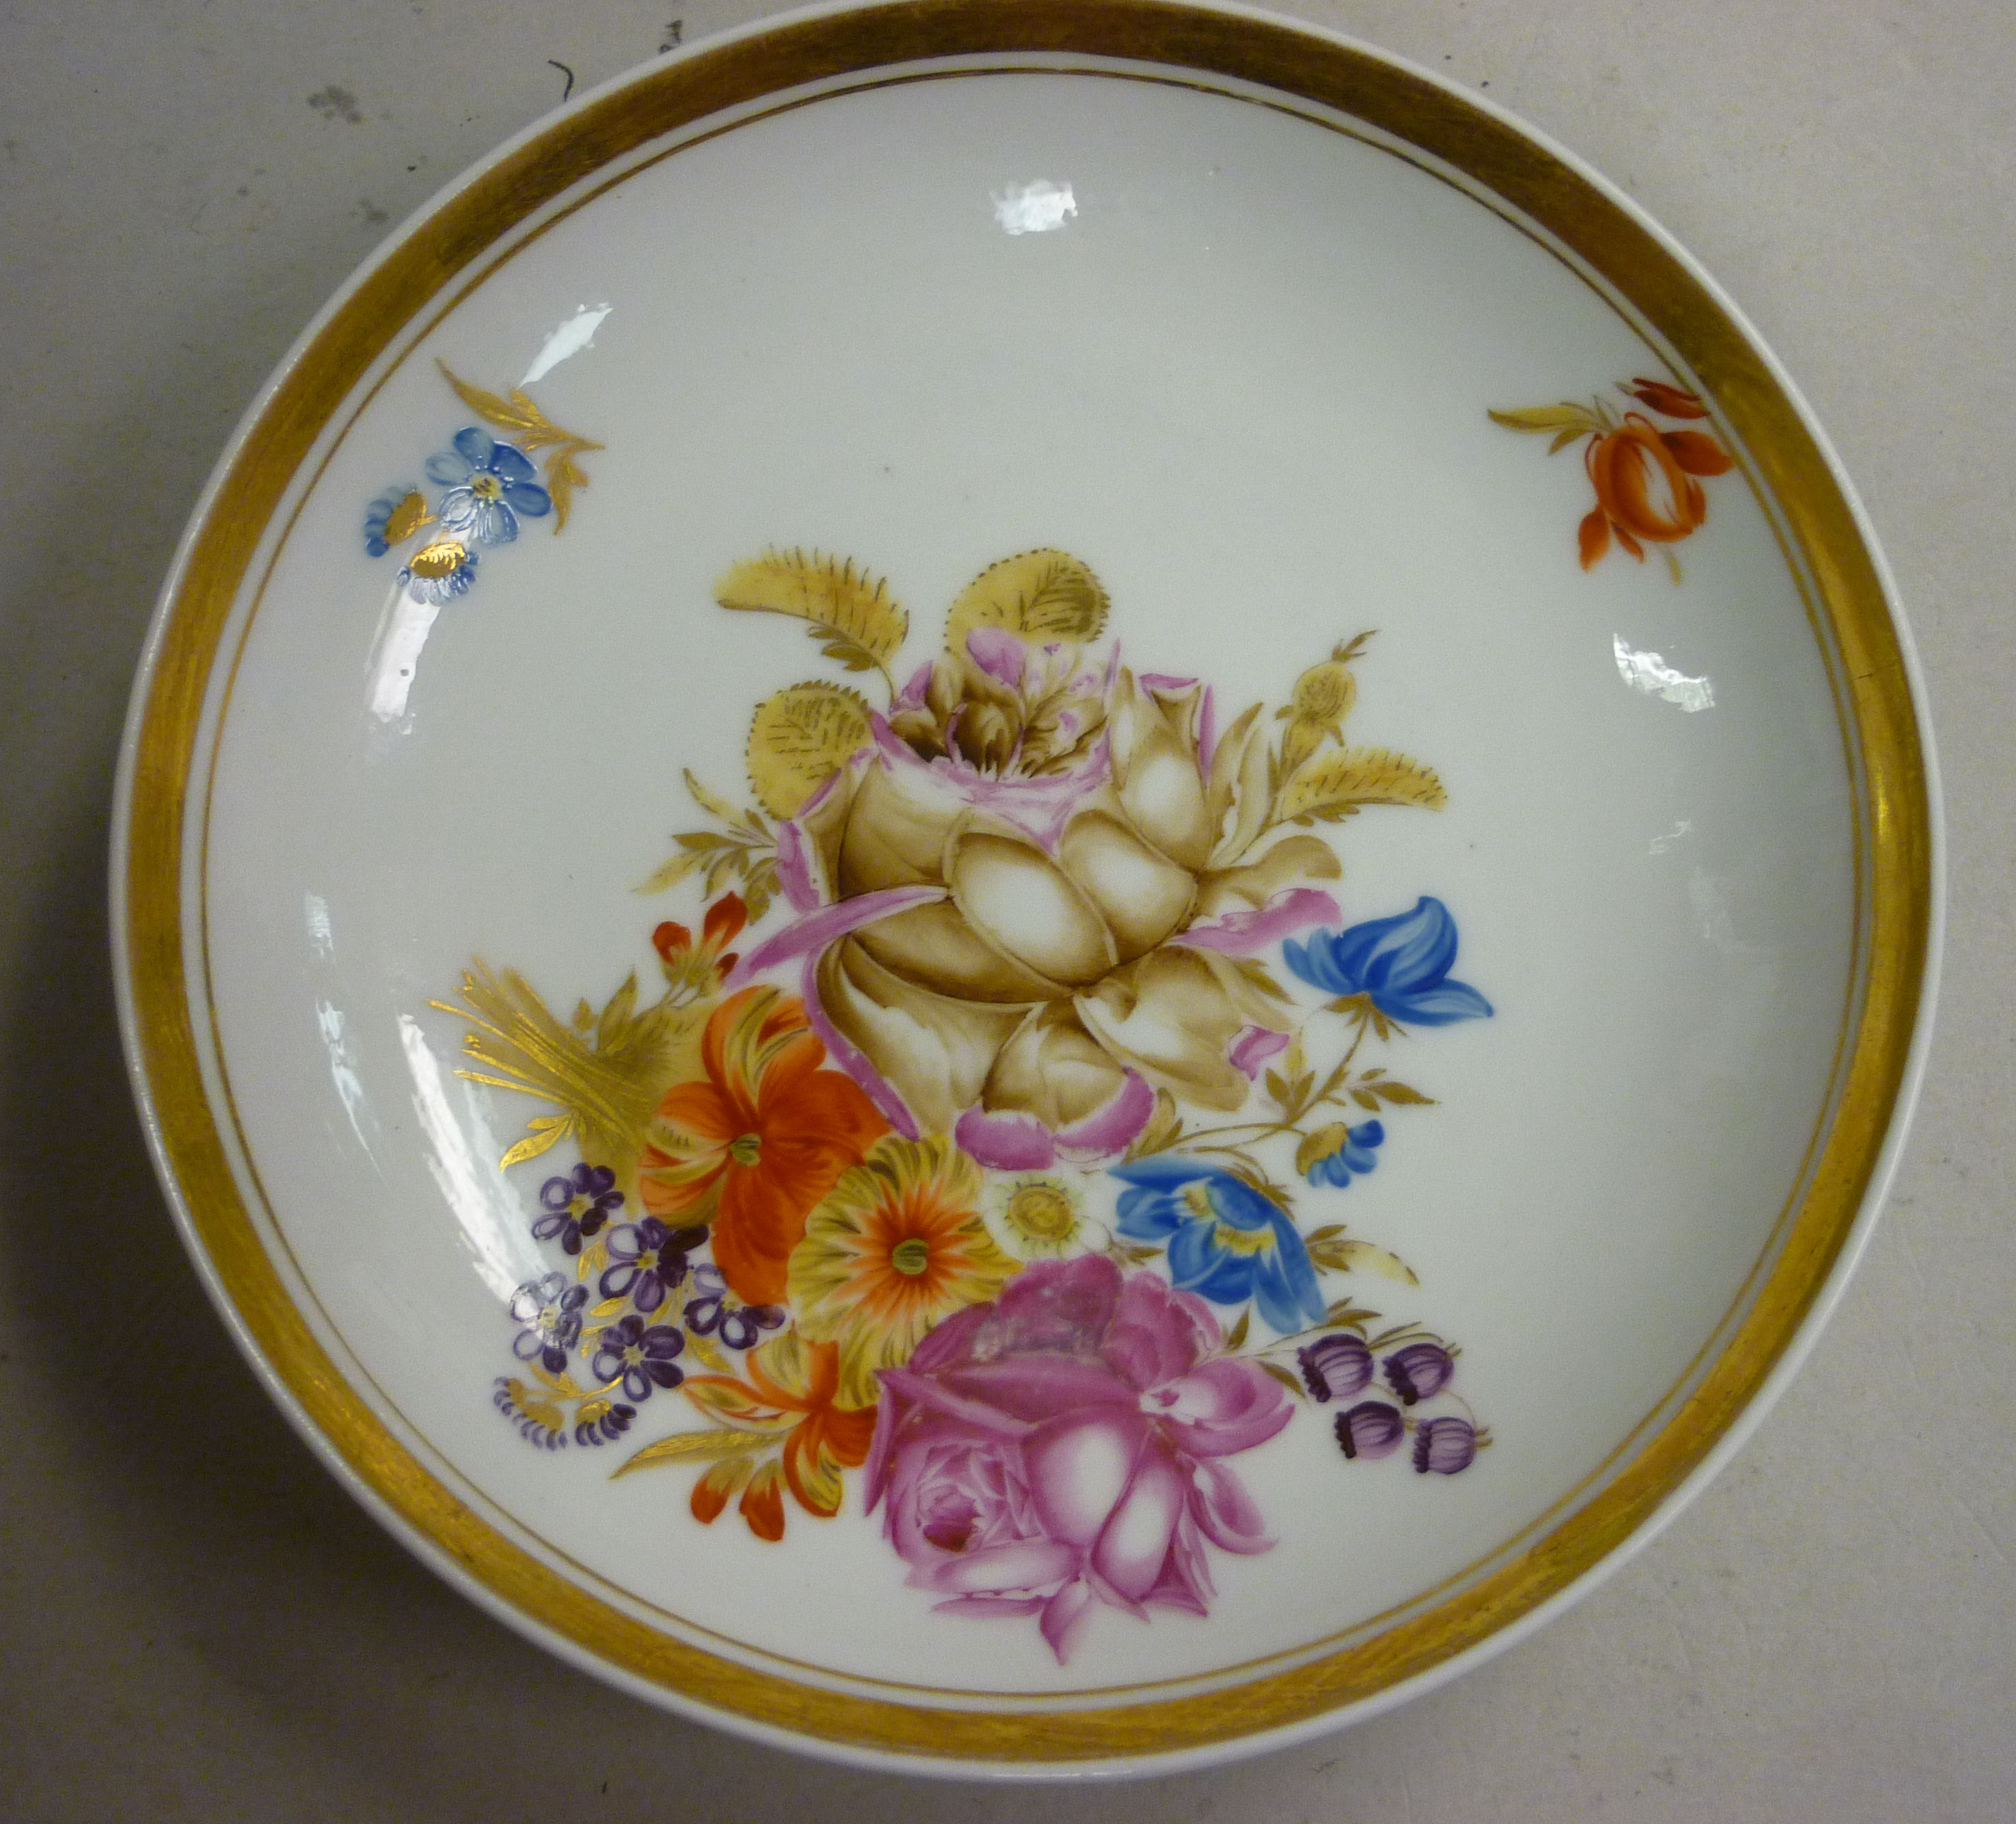 An early 19thC Russian (Moscow) porcelain saucer dish, decorated with flowers and highlighted in